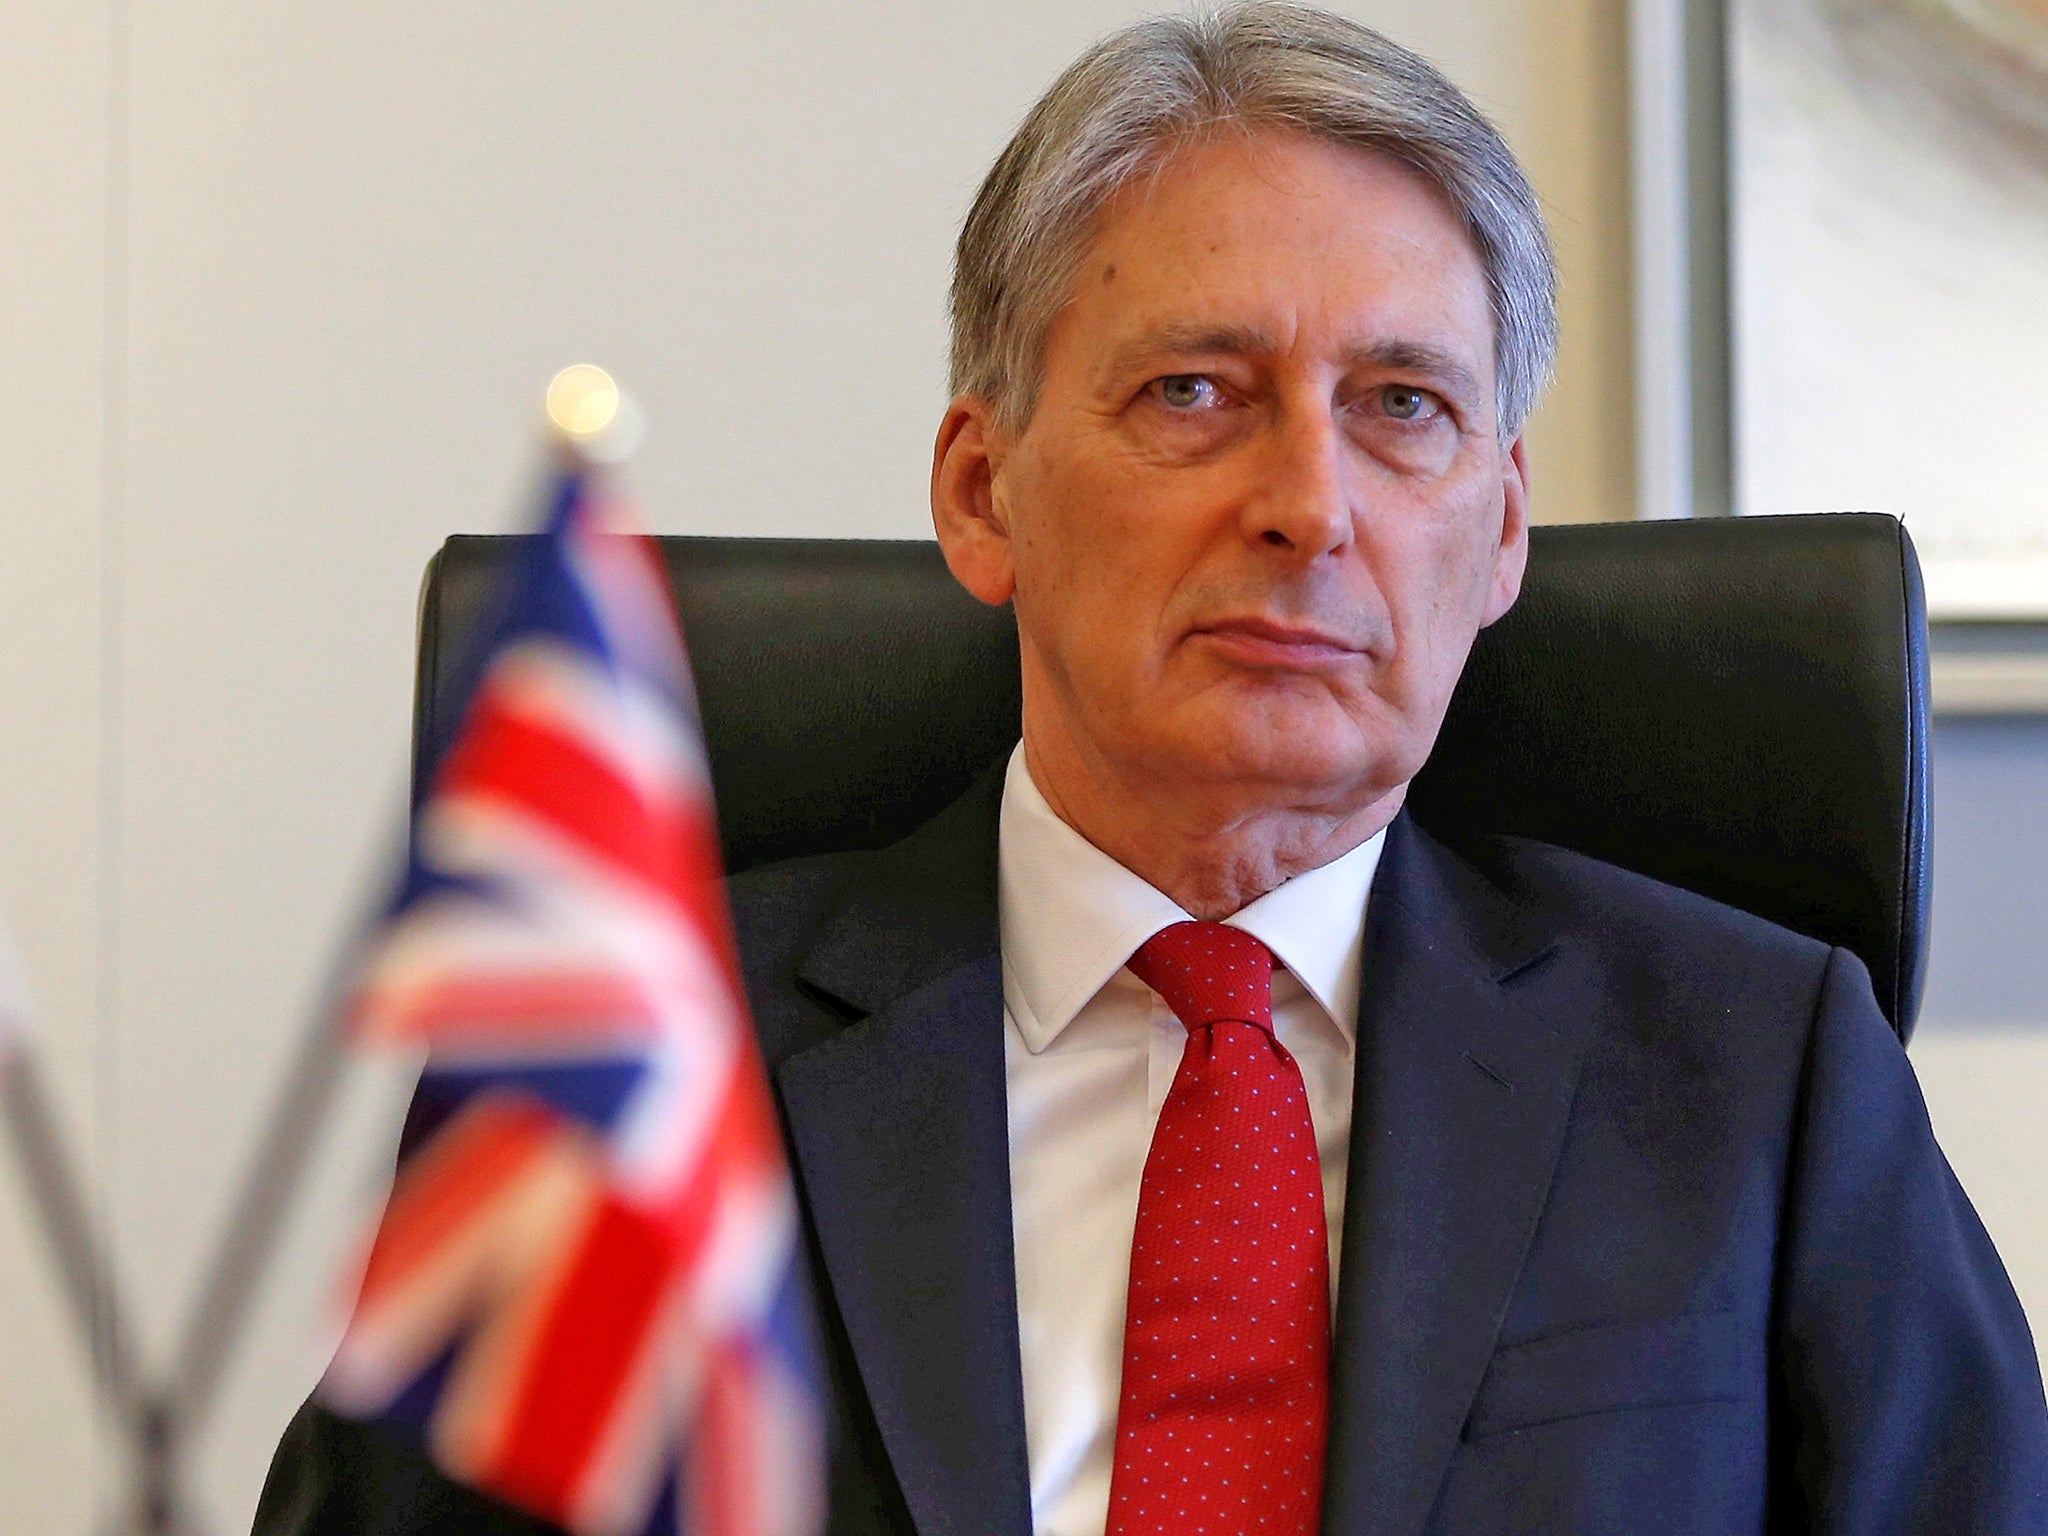 Chancellor Philip Hammond has warned of 'tensions' among Tories as May seeks an EU deal